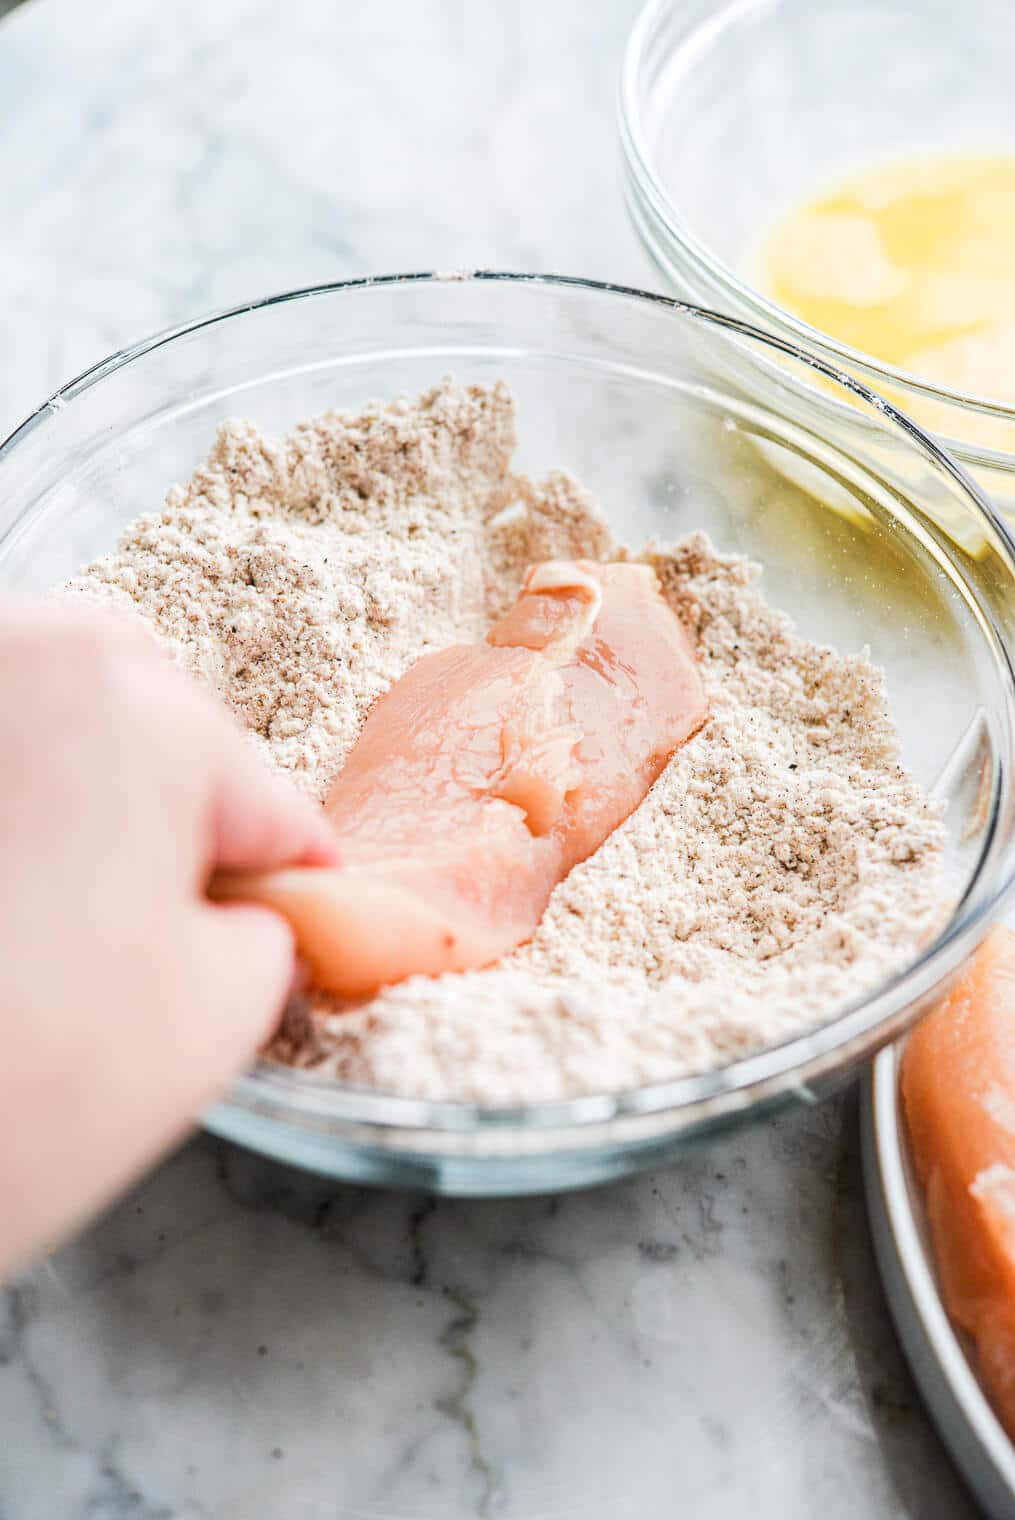 a person coating a raw chicken tender in a flour mixture